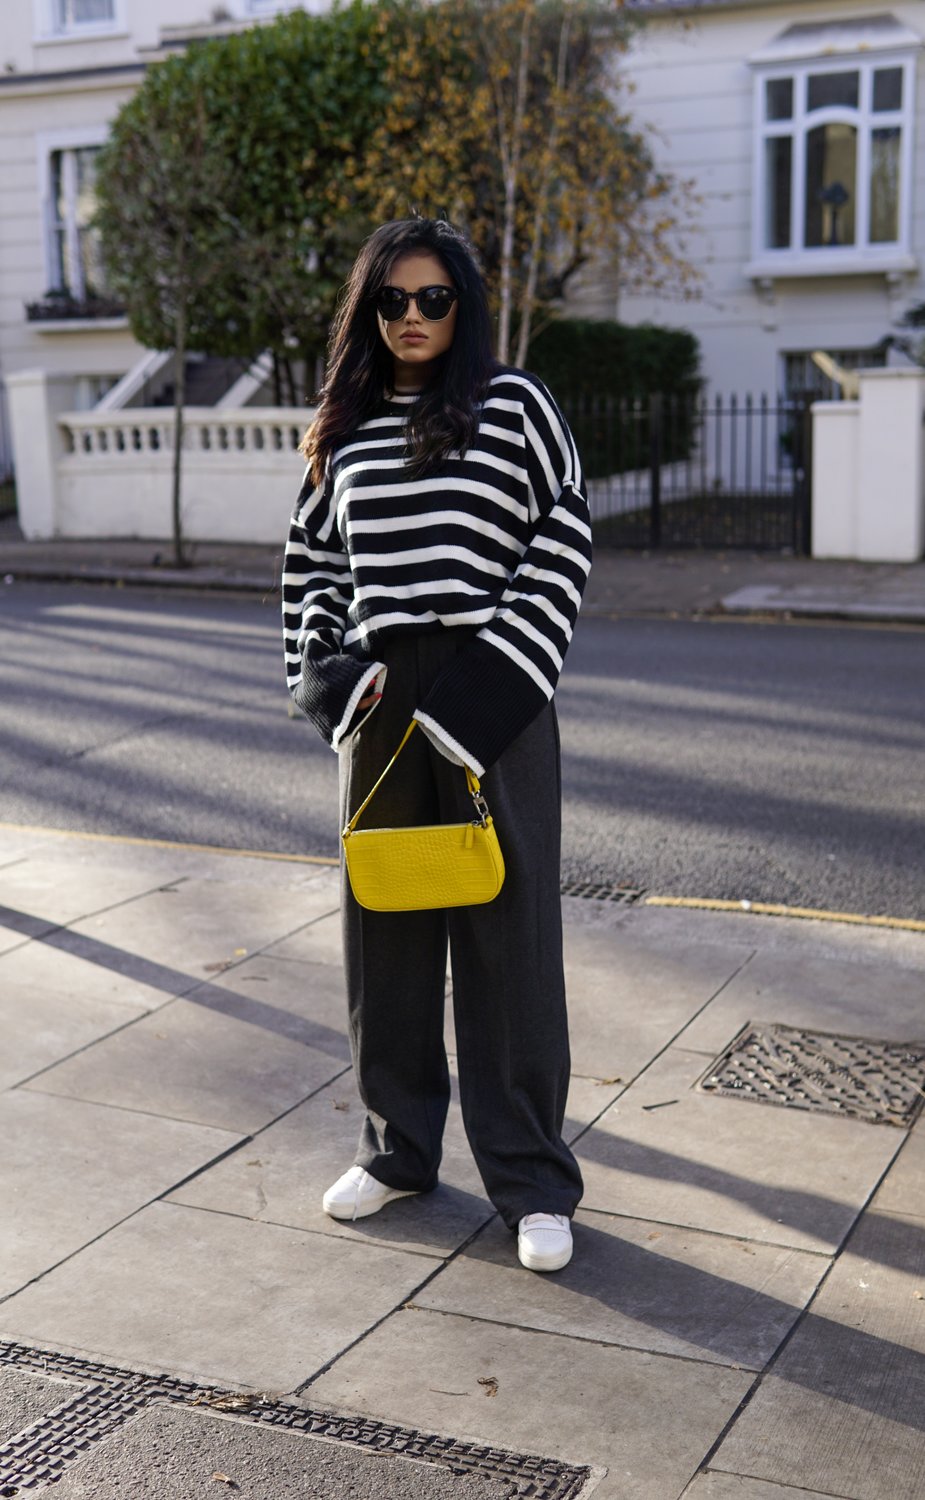 Sachini standing on a sidewalk wearing an oversized Chicwish striped jumper and trousers with a yellow bag